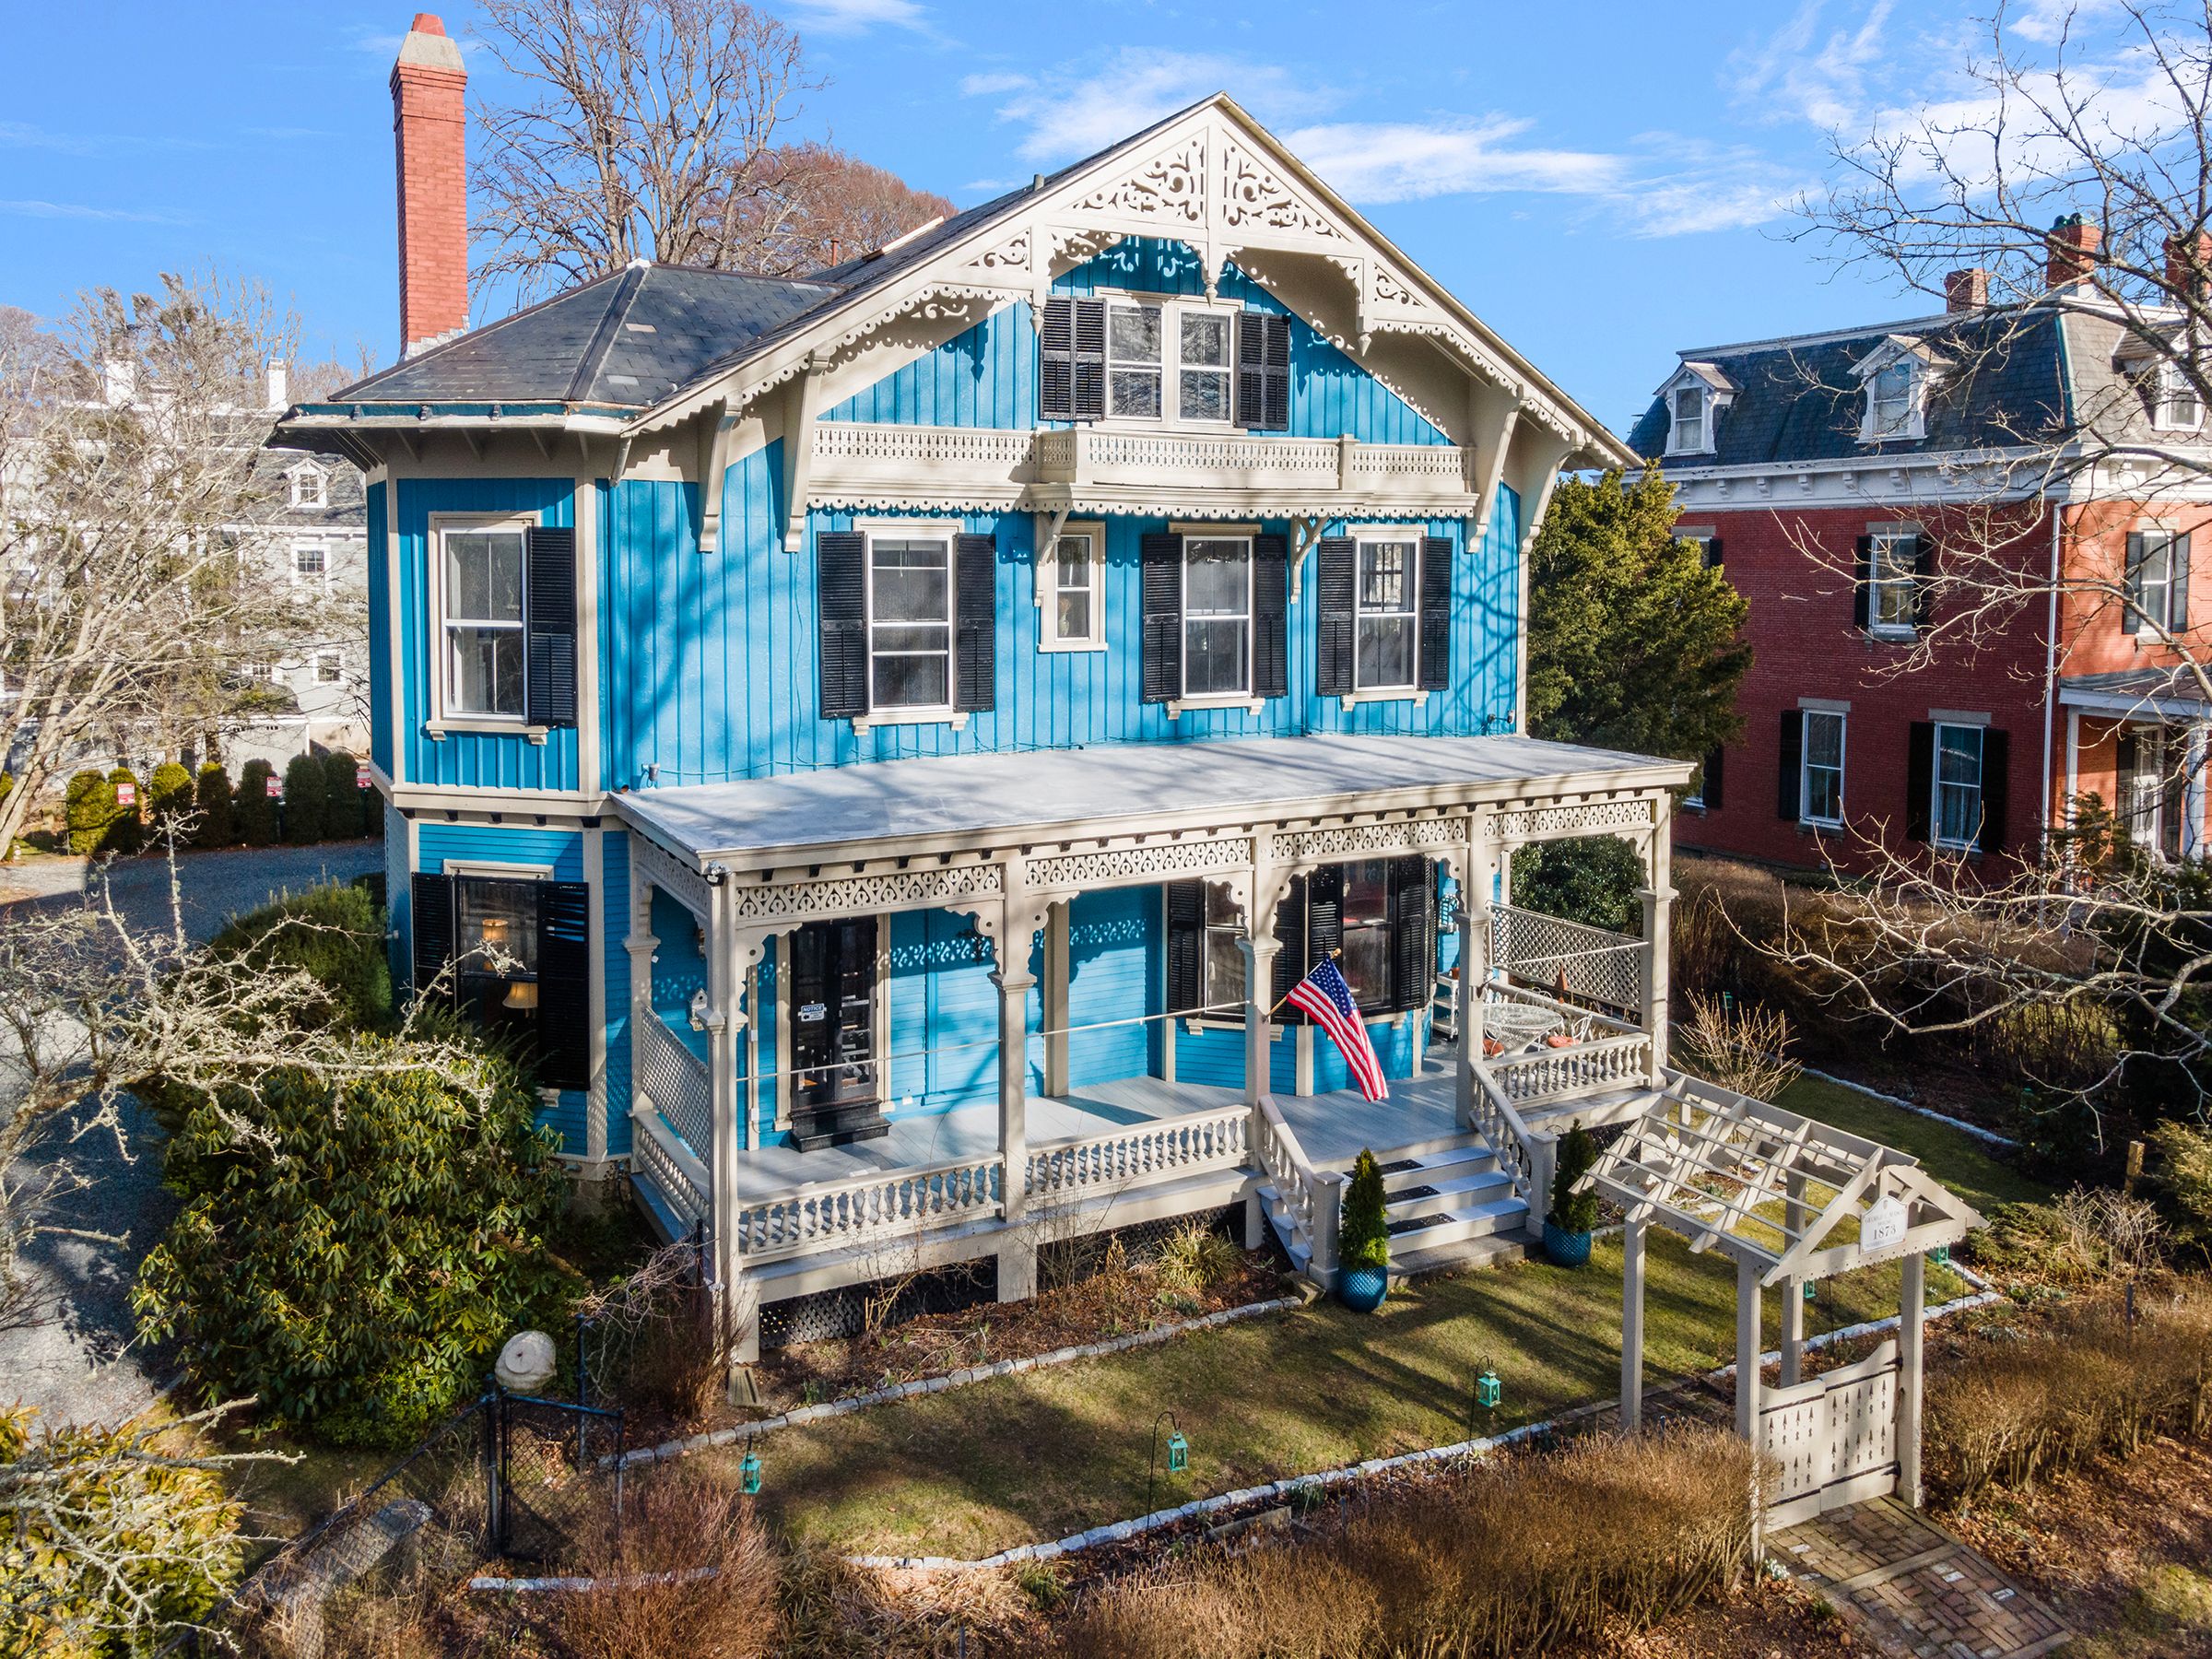 Who goes there? A bright Newport mansion with a Medieval-style watchtower